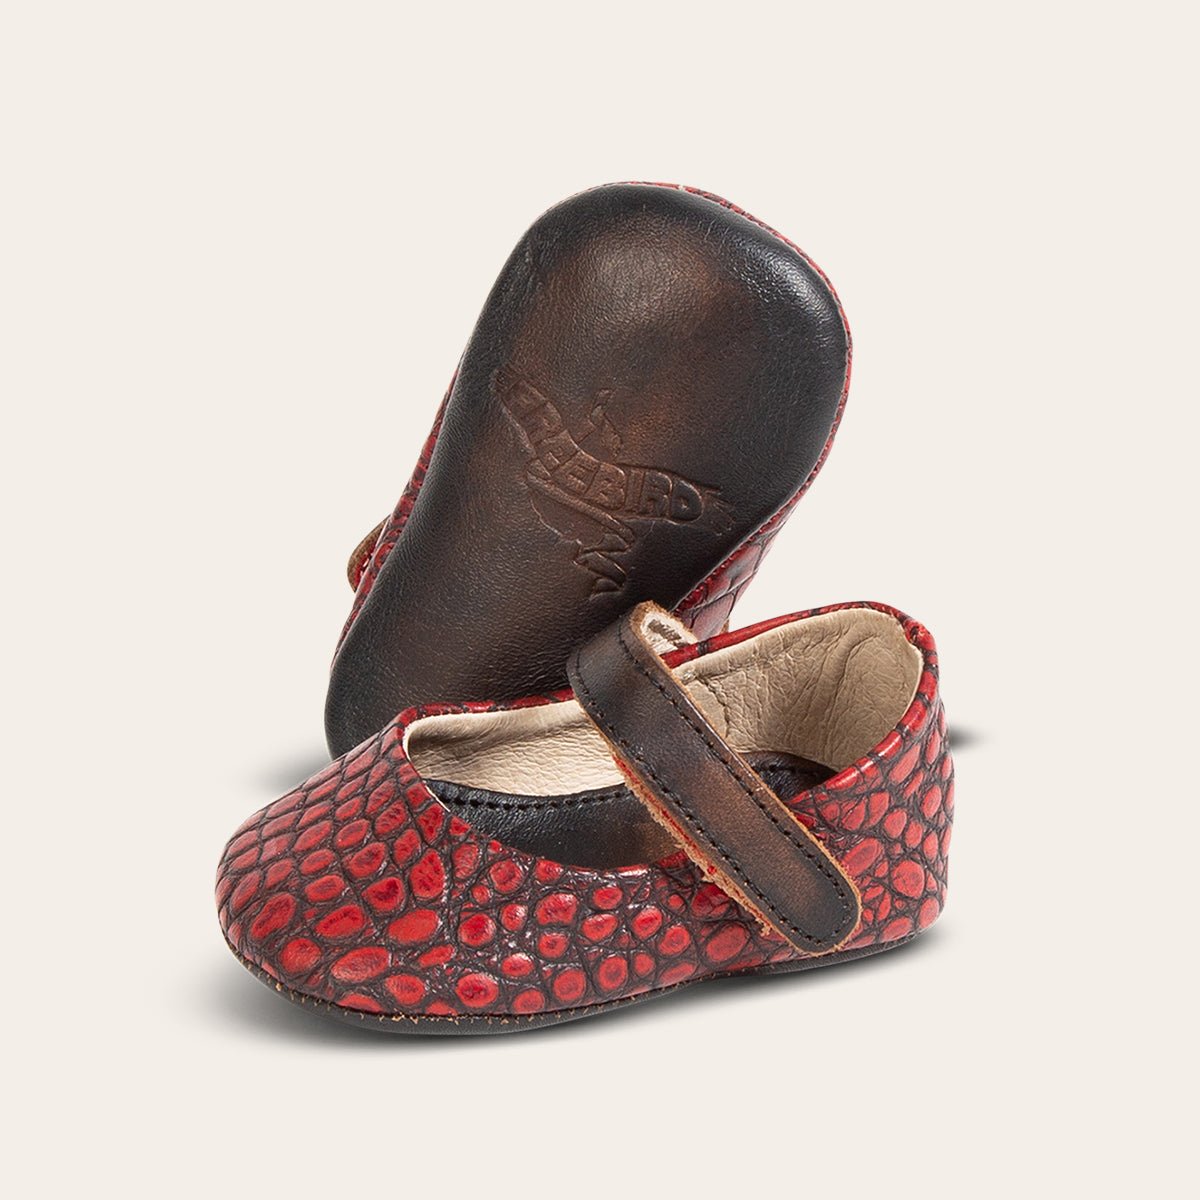 side view showing top leather strap and soft leather imprinted sole on FREEBIRD infant baby jane red croco leather shoe